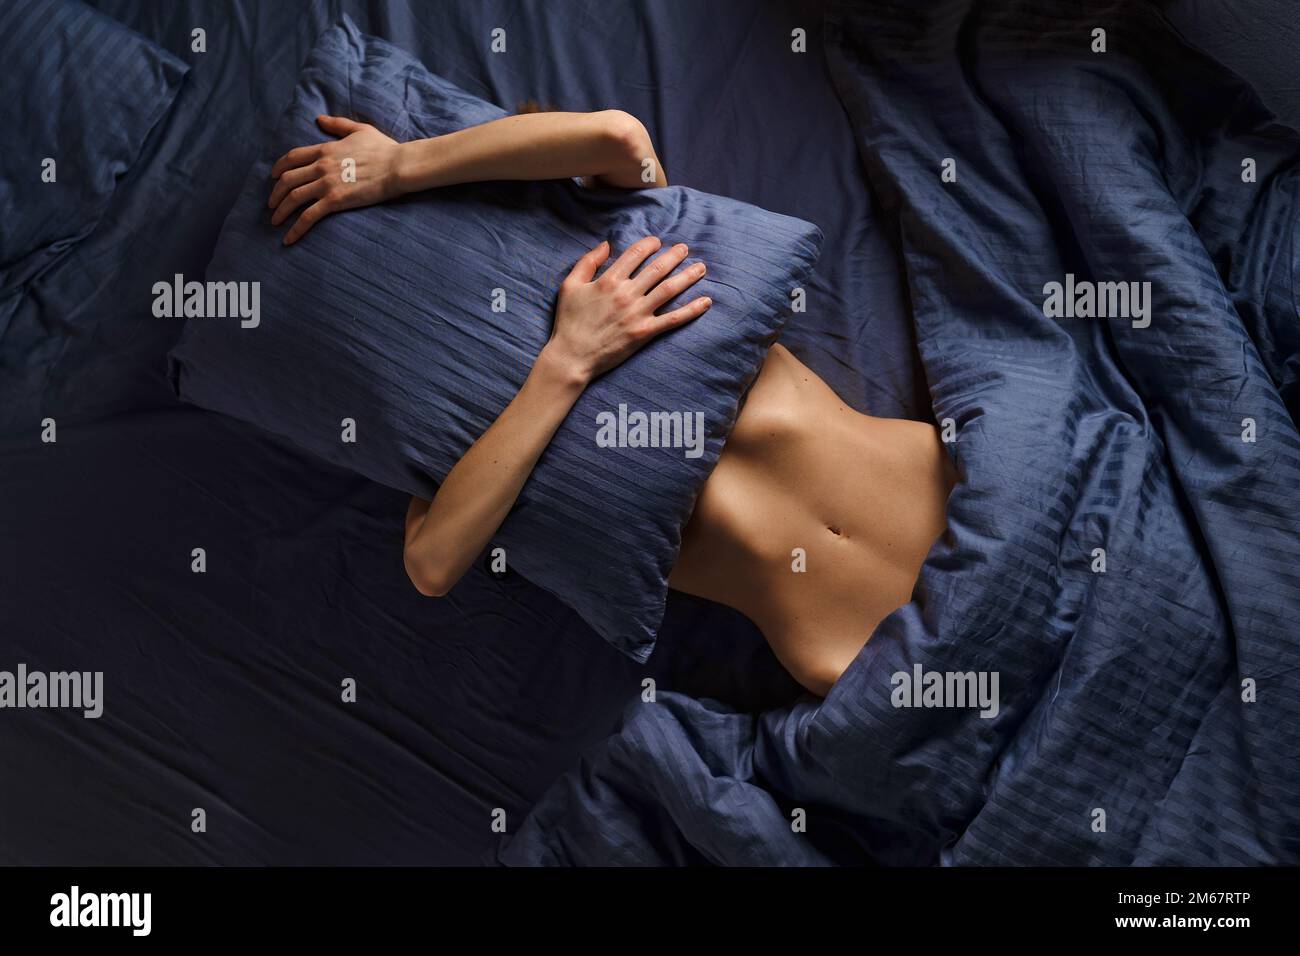 Concept of comfortable rest in bed, lazy weekend and introversion. Woman covers her face with pillow while lying in bed. Stock Photo